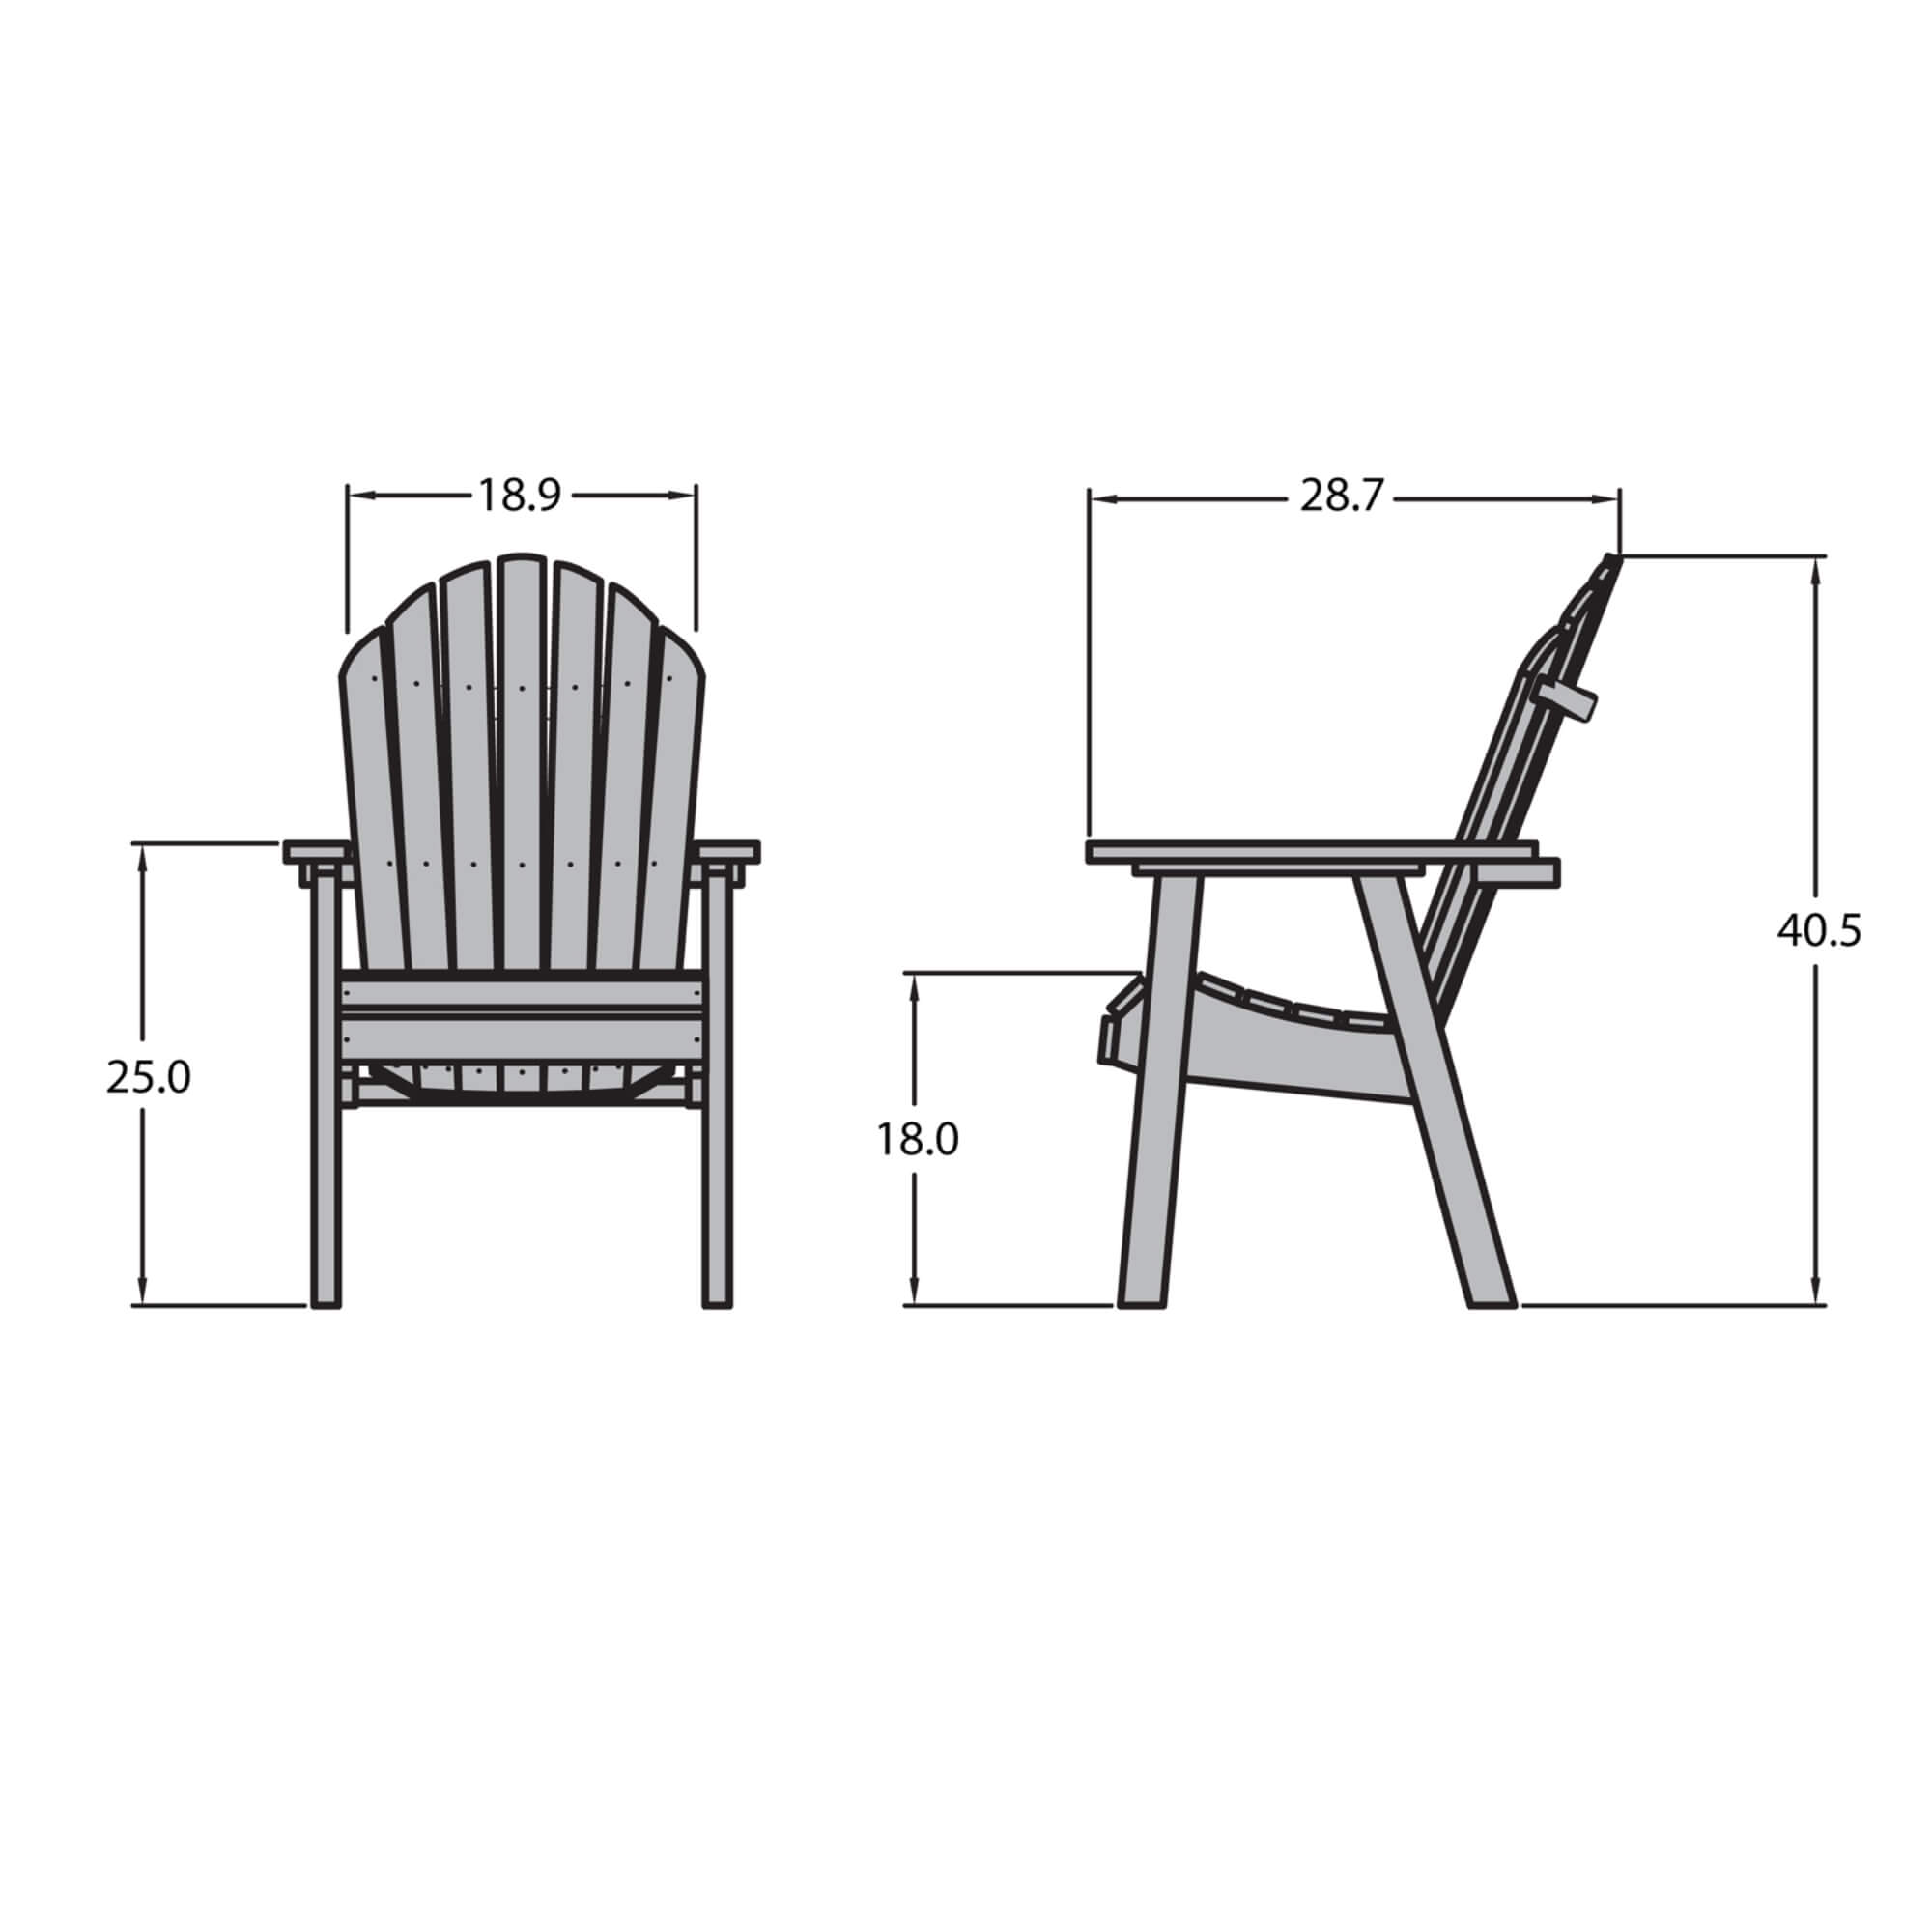 The Sequoia Professional Commercial Grade Muskoka Adirondack Deck Dining Chair - image 3 of 5